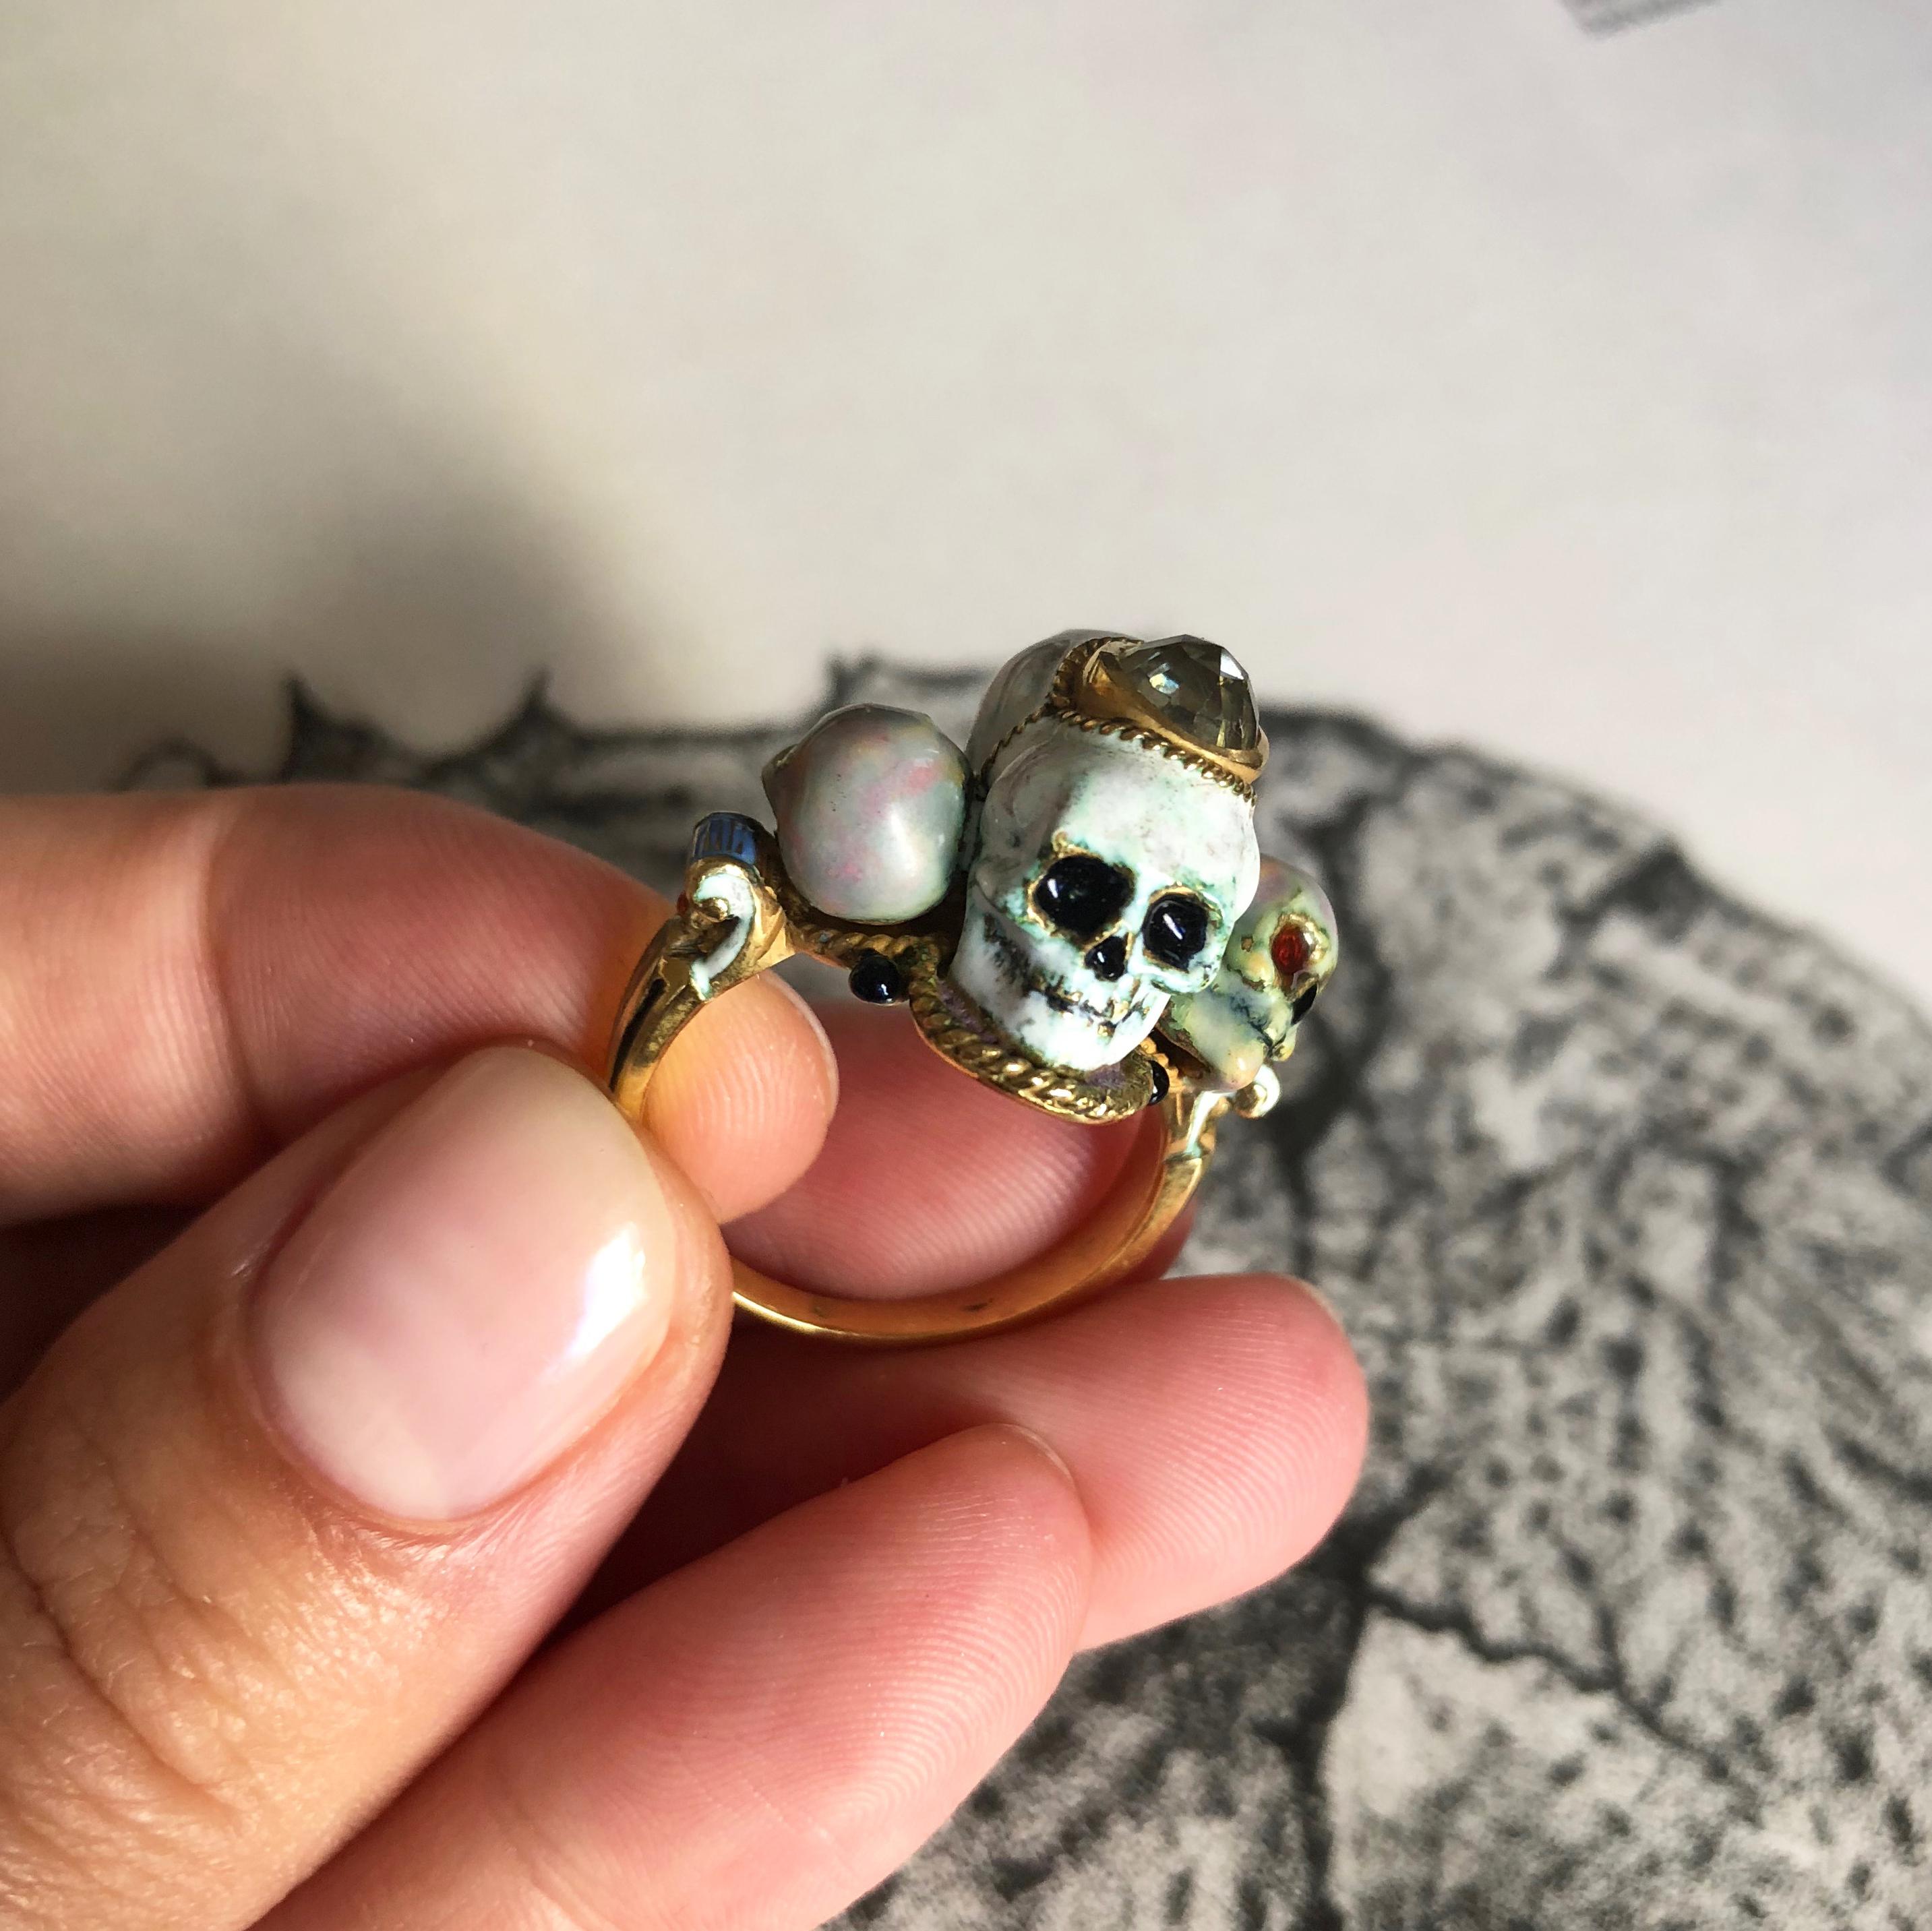 A vintage, diamond, enamel, and 18-karat gold four-headed skull ring by Attilio Codognato, Italy. Stamped A. Codognato Venezia. Size nine and perfect for a middle finger. The ring is an excellent and wearable example of Codognato's workmanship and